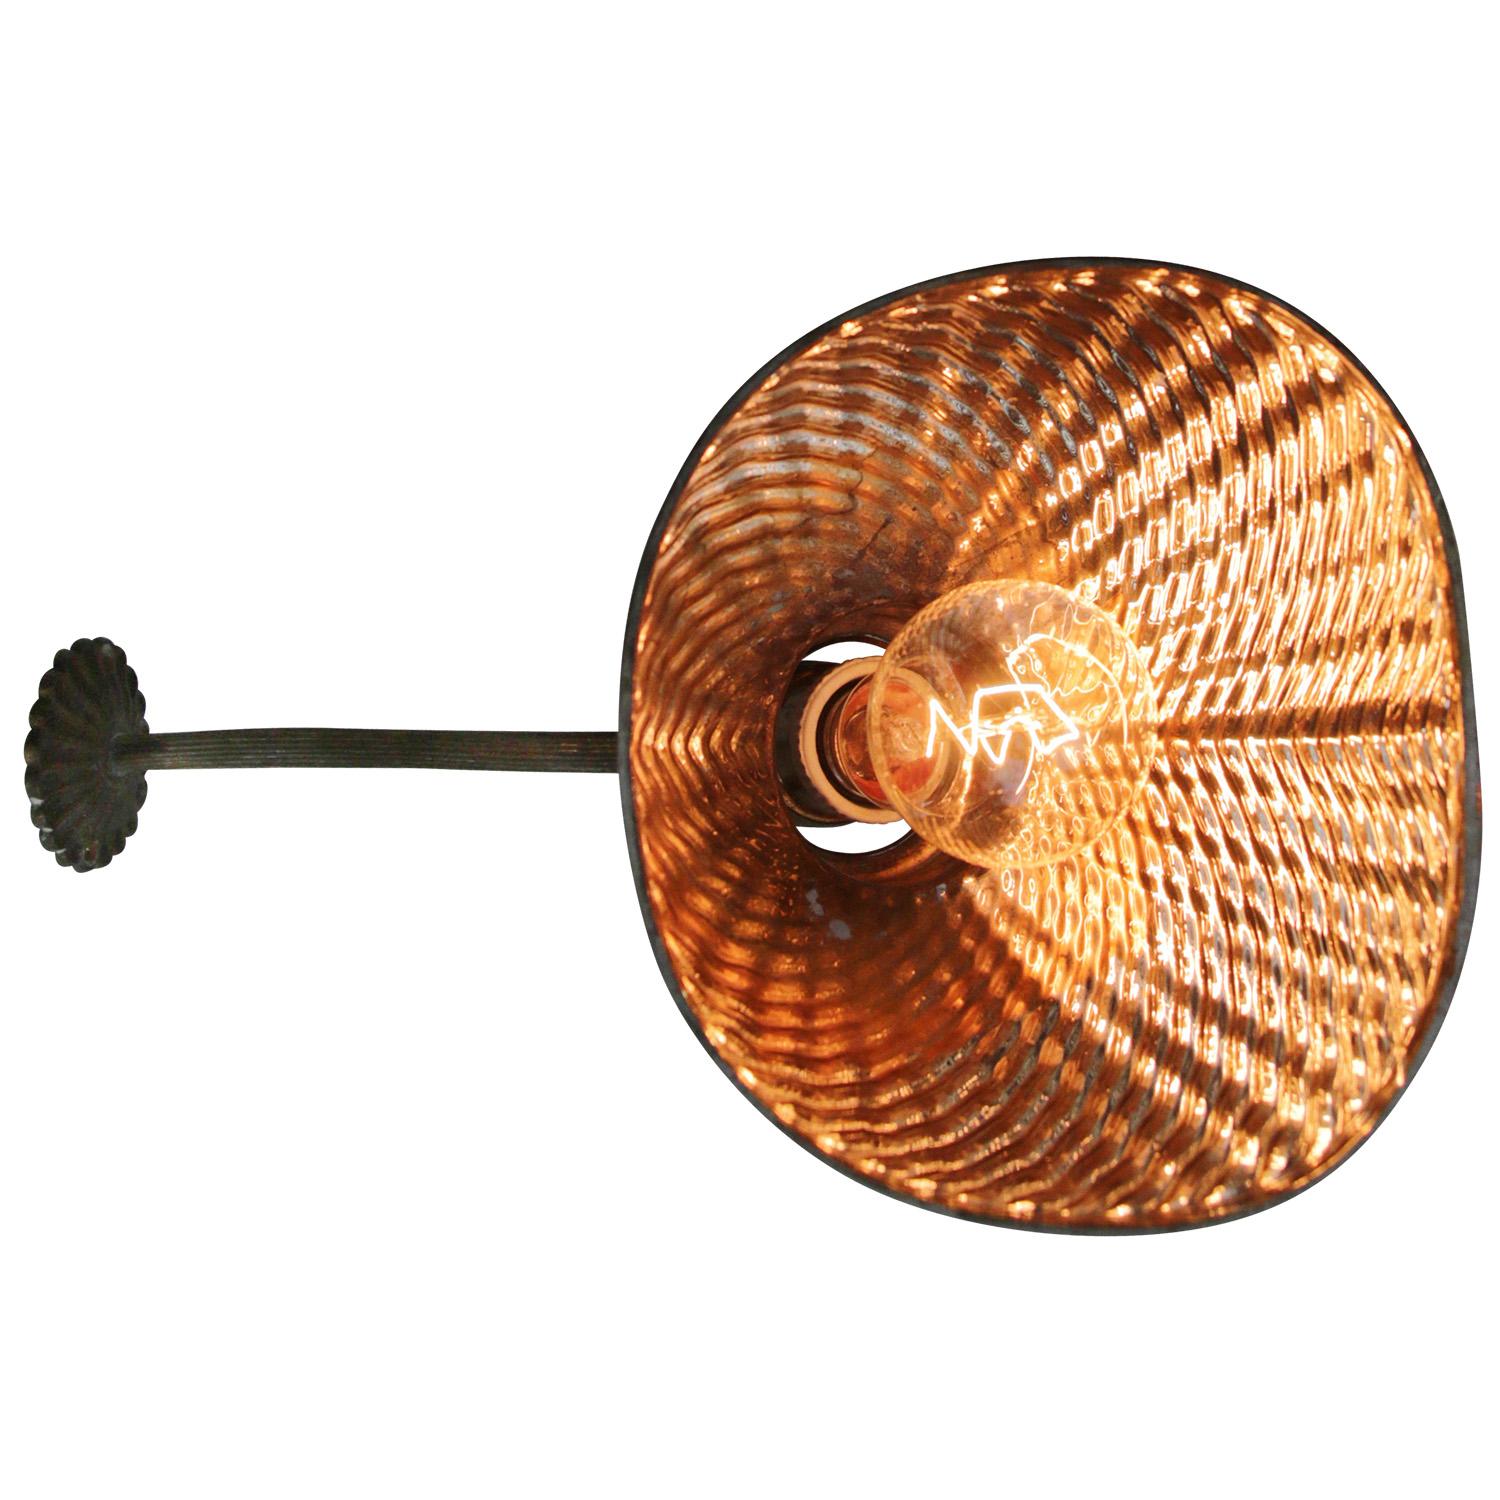 Mercury glass wall lamp
Brass with mirror glass shade

Measure: Diameter wall mount 5.5 cm

Weight: 0.40 kg / 0.9 lb

Priced per individual item. All lamps have been made suitable by international standards for incandescent light bulbs,